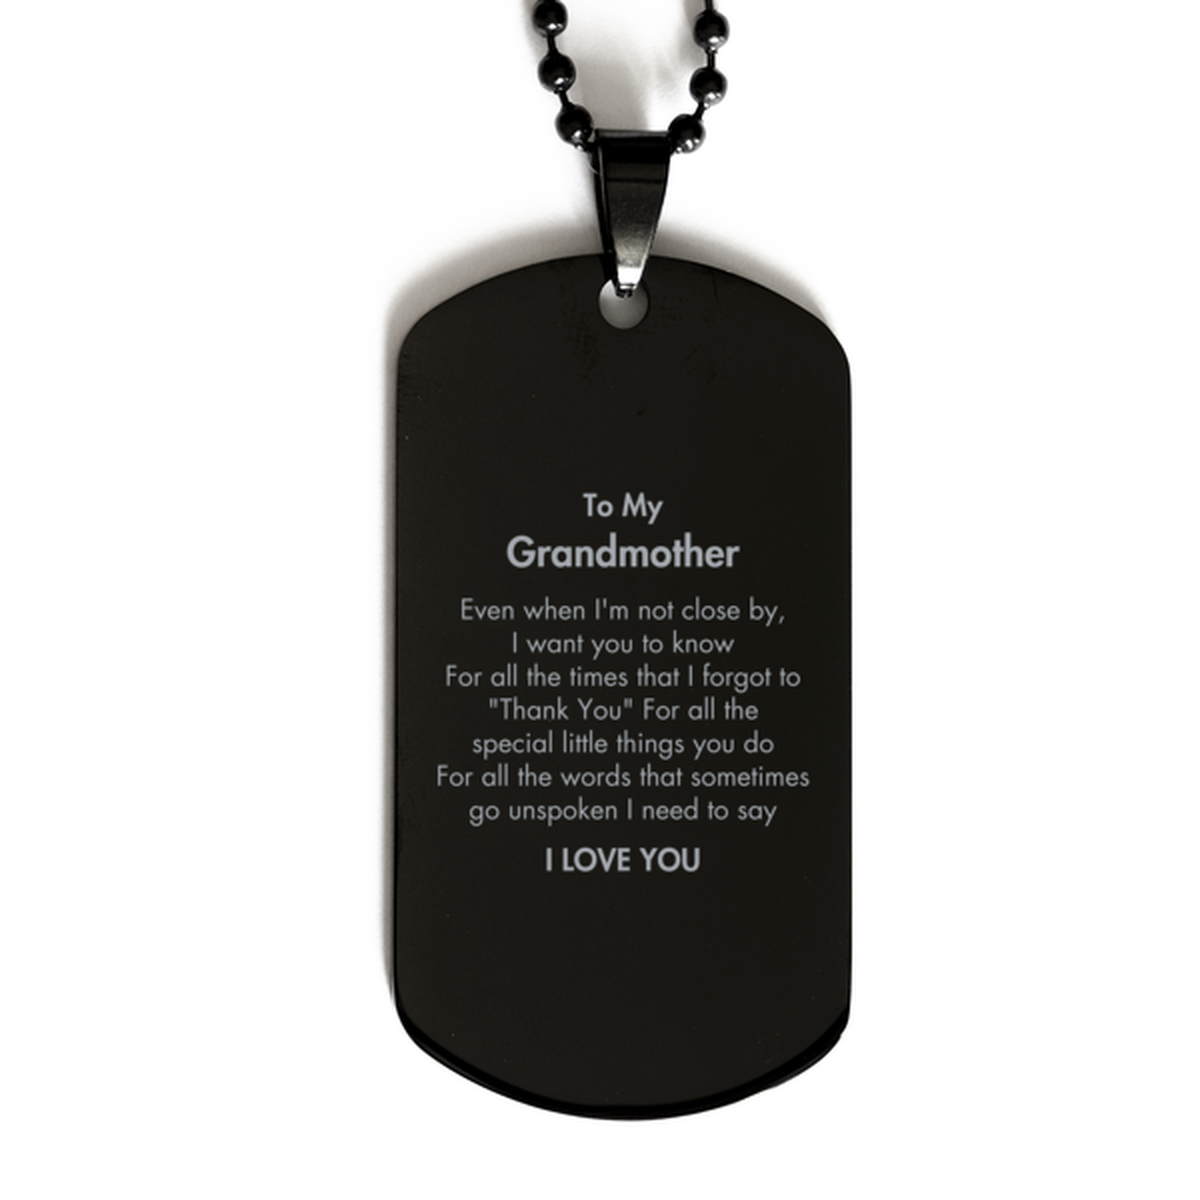 Thank You Gifts for Grandmother, Keepsake Black Dog Tag Gifts for Grandmother Birthday Mother's day Father's Day Grandmother For all the words That sometimes go unspoken I need to say I LOVE YOU